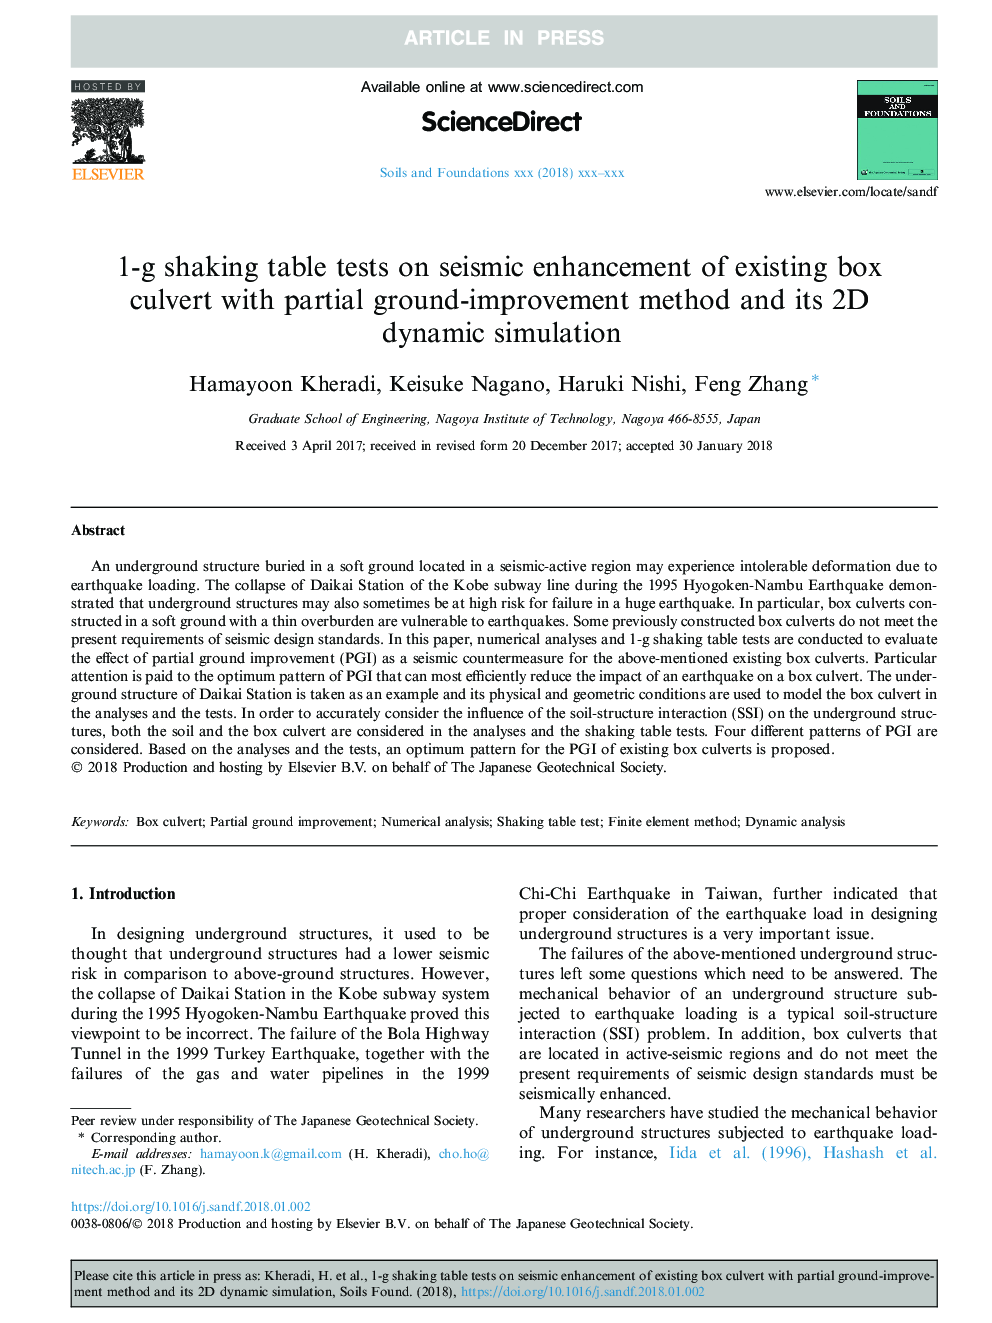 1-g shaking table tests on seismic enhancement of existing box culvert with partial ground-improvement method and its 2D dynamic simulation